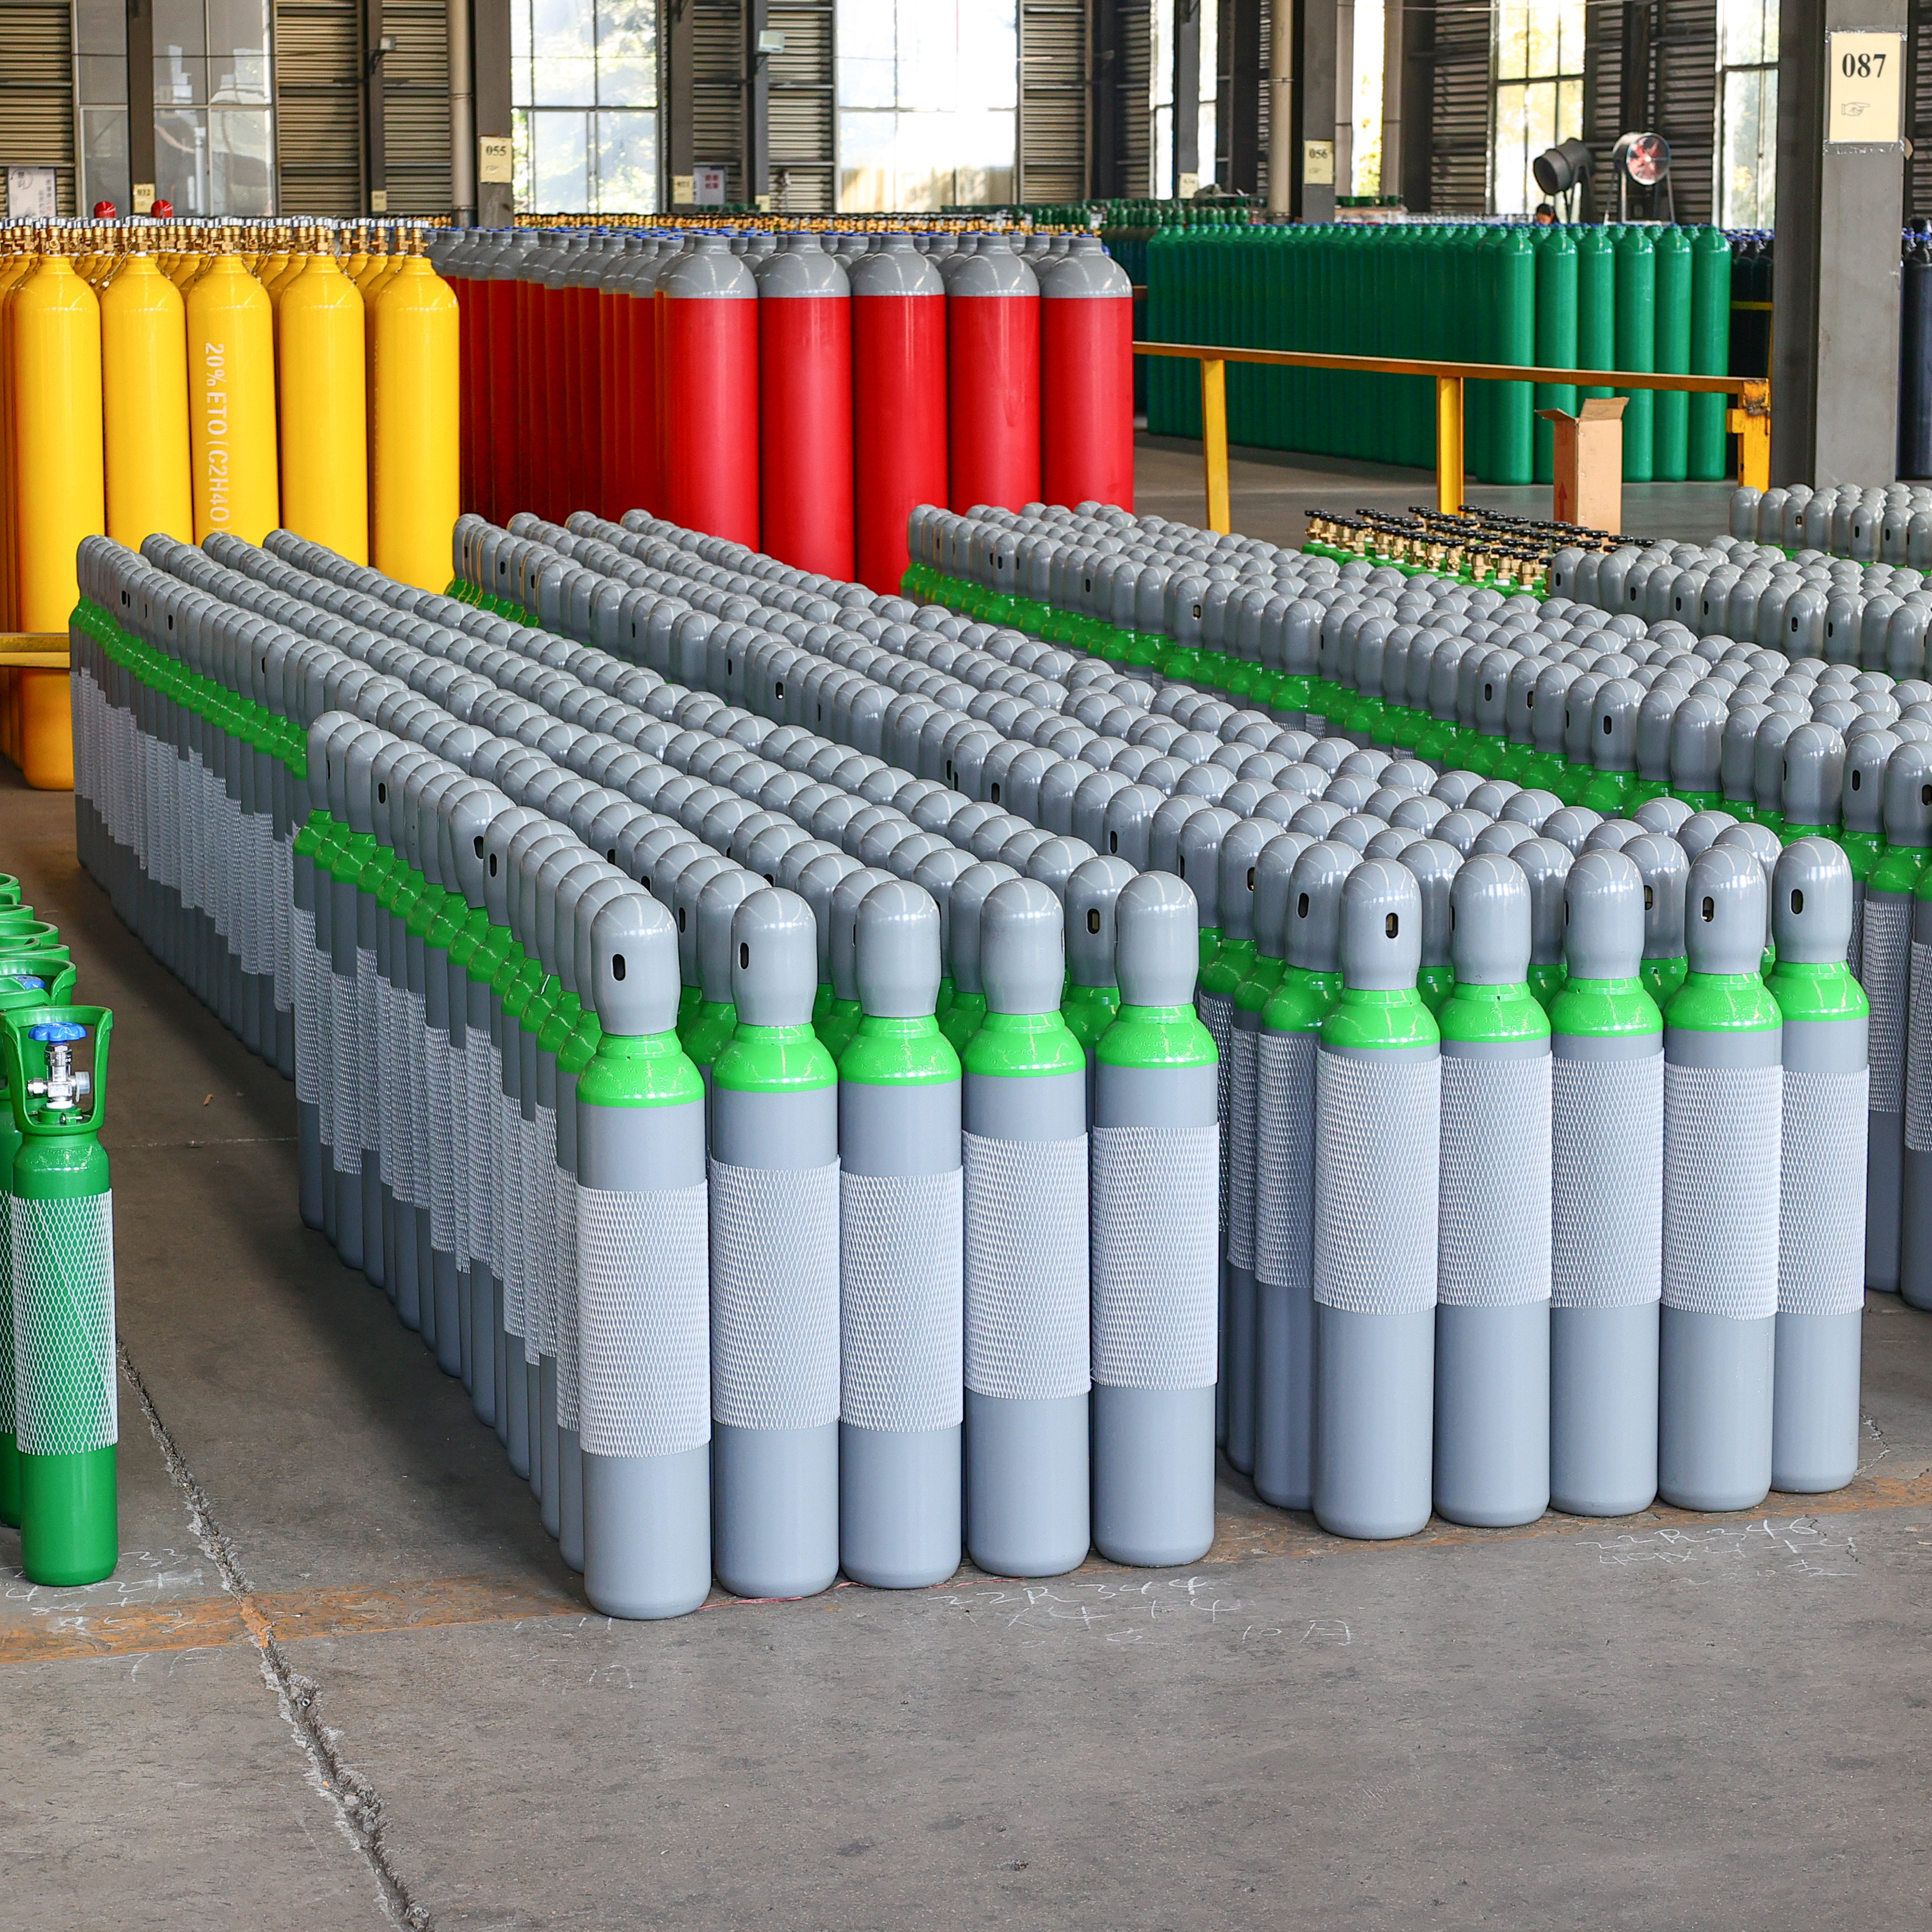 10L 200Bar ISO9809 TPED Standard Seamless Steel Cylinder Gas Cylinder